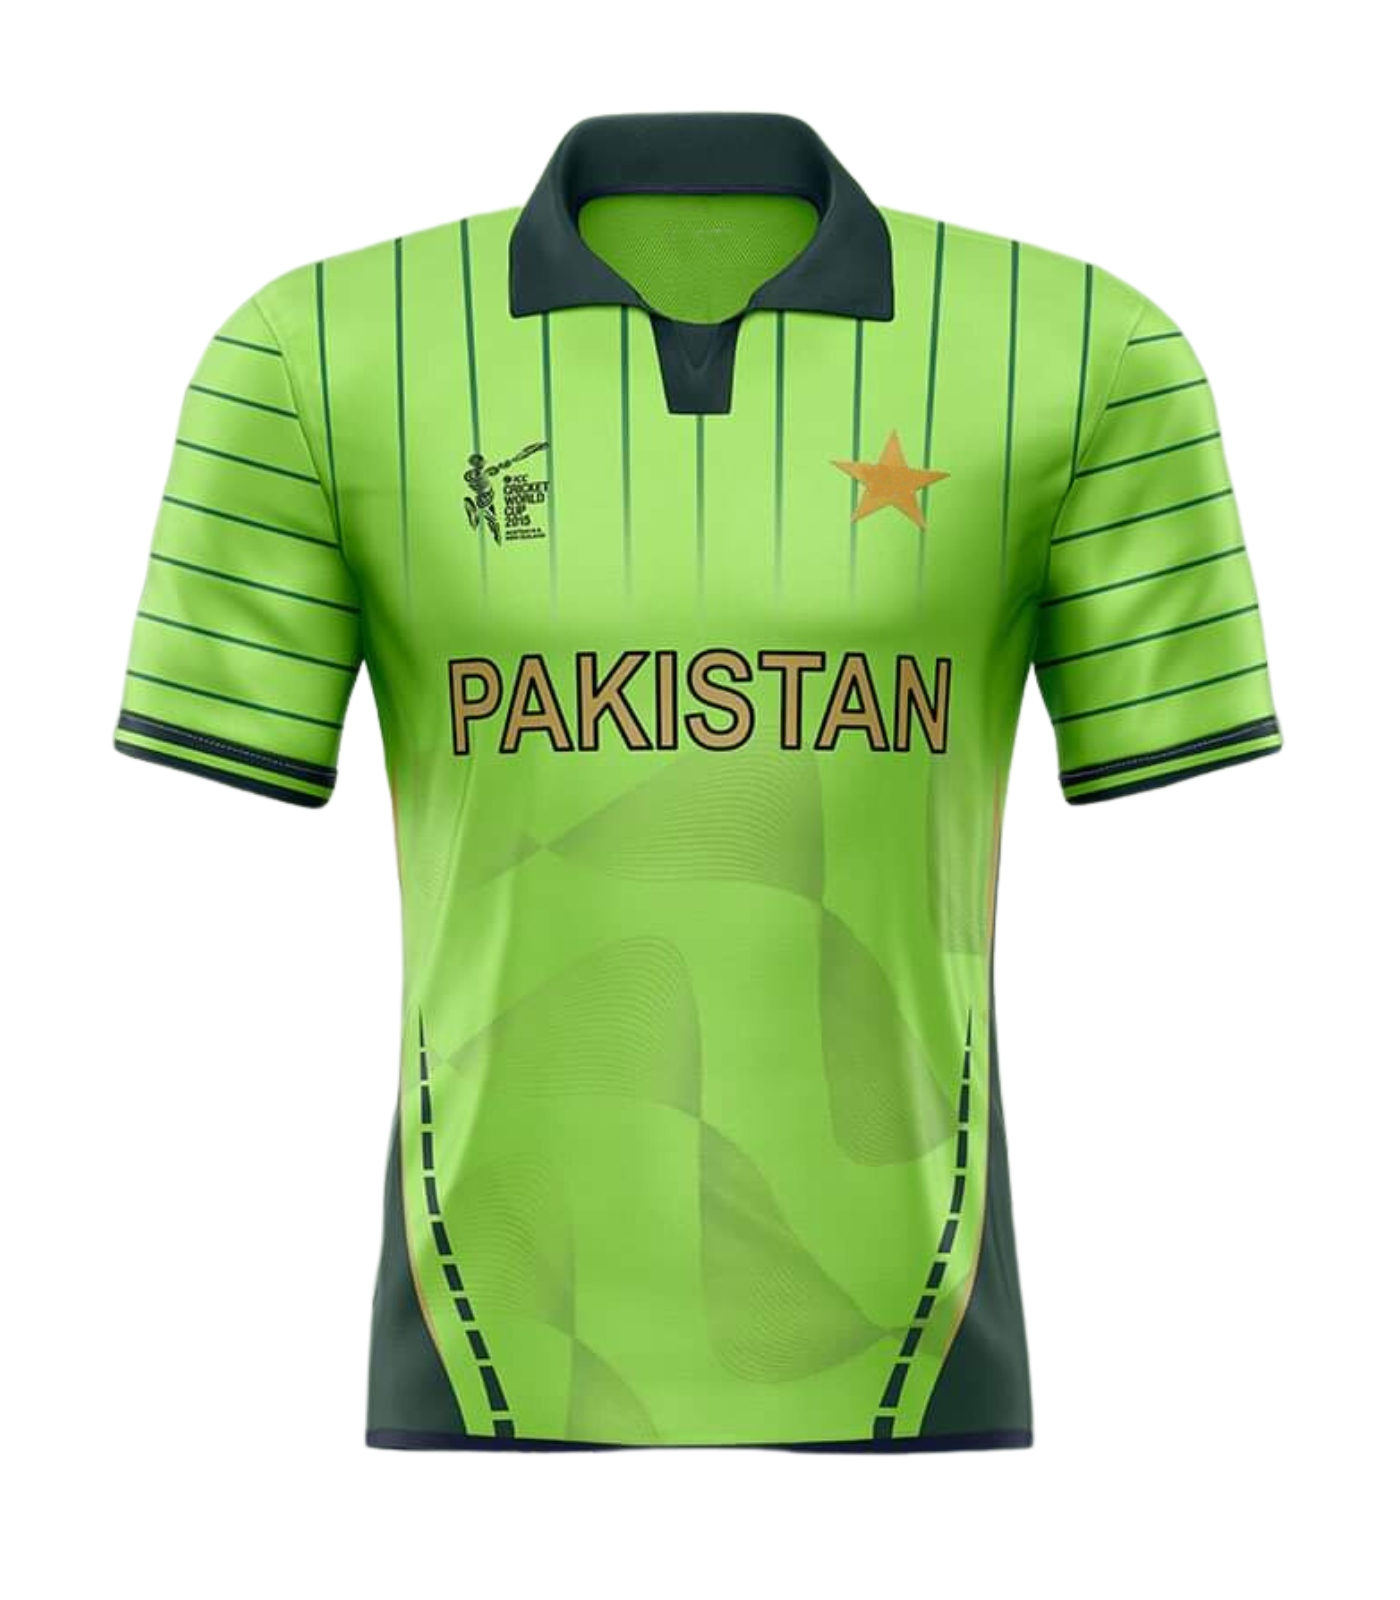 Pakistan 2015 World Cup Jersey - The Shoppies